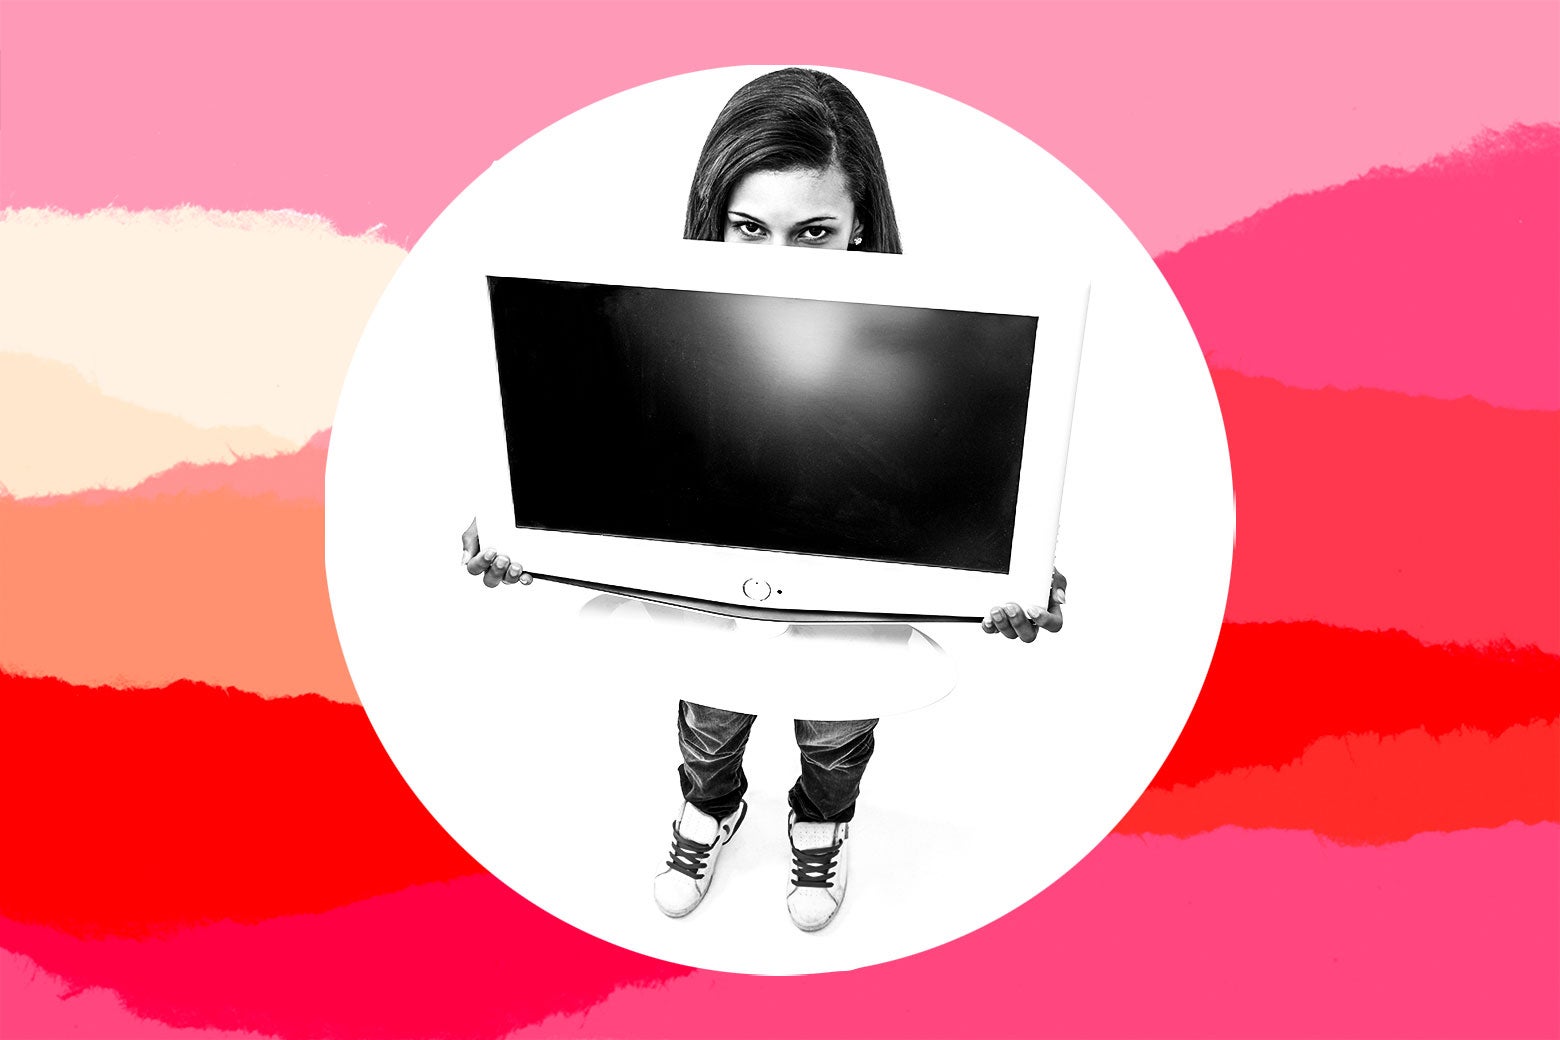 Woman holding up a television screen in front of her face.